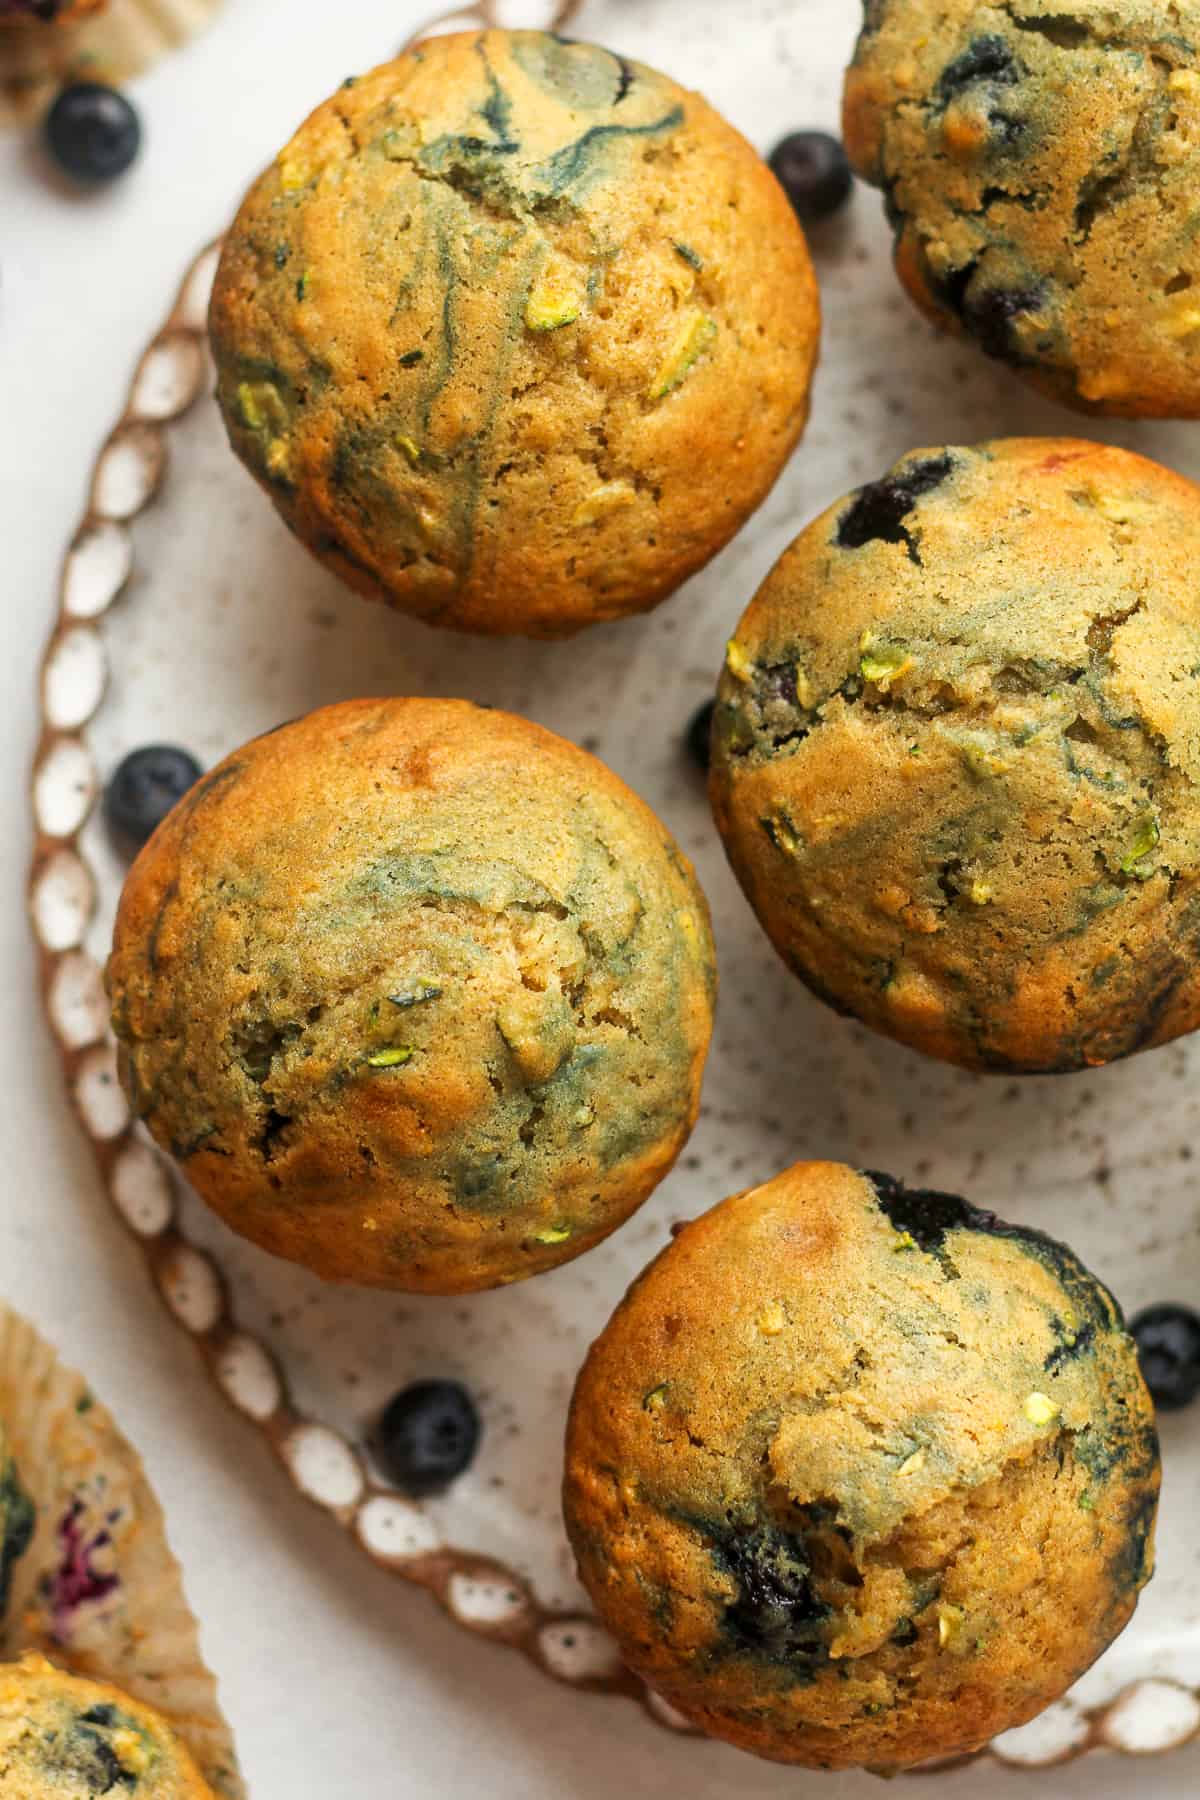 A plate of several blueberry zucchini muffins.